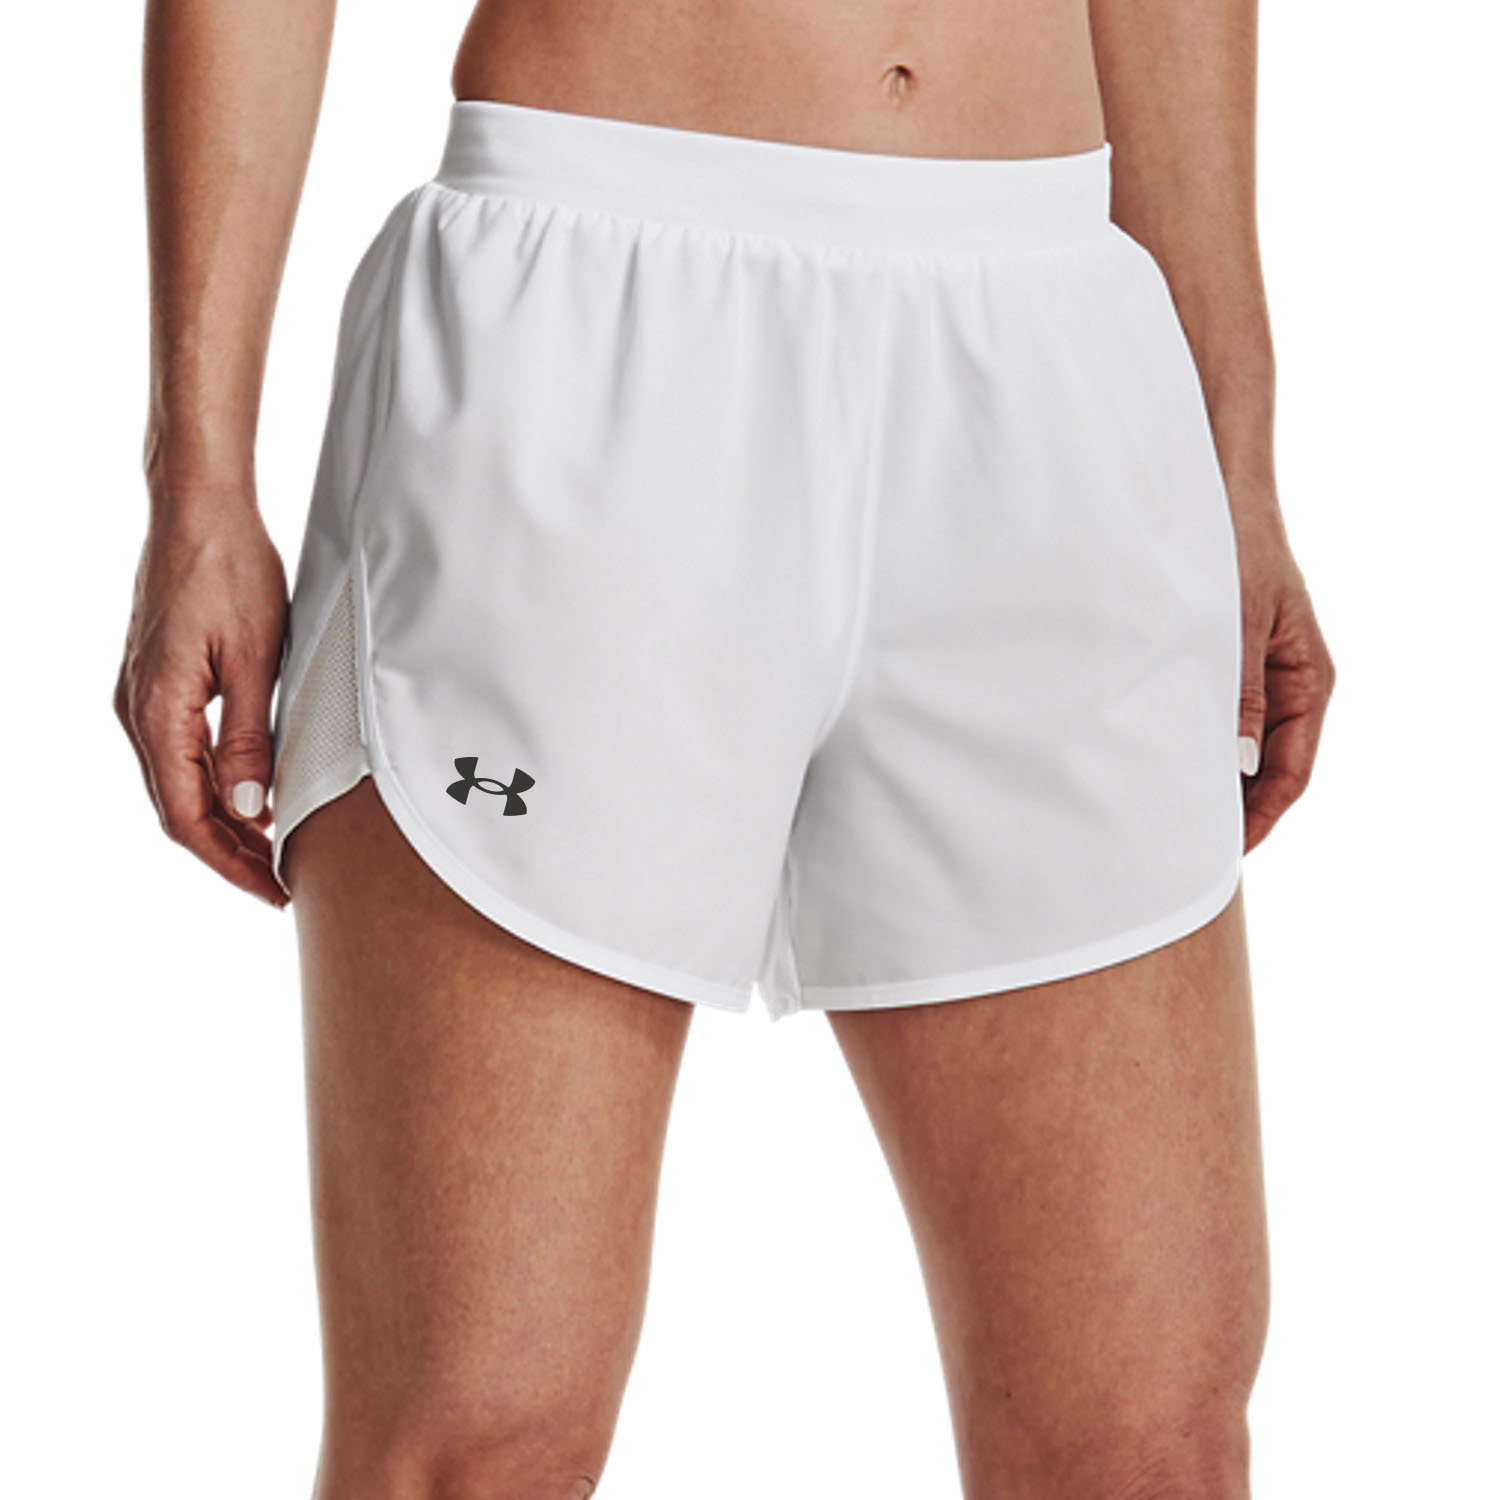 Under Armour Fly Elite Shorts de Running Mujer - White